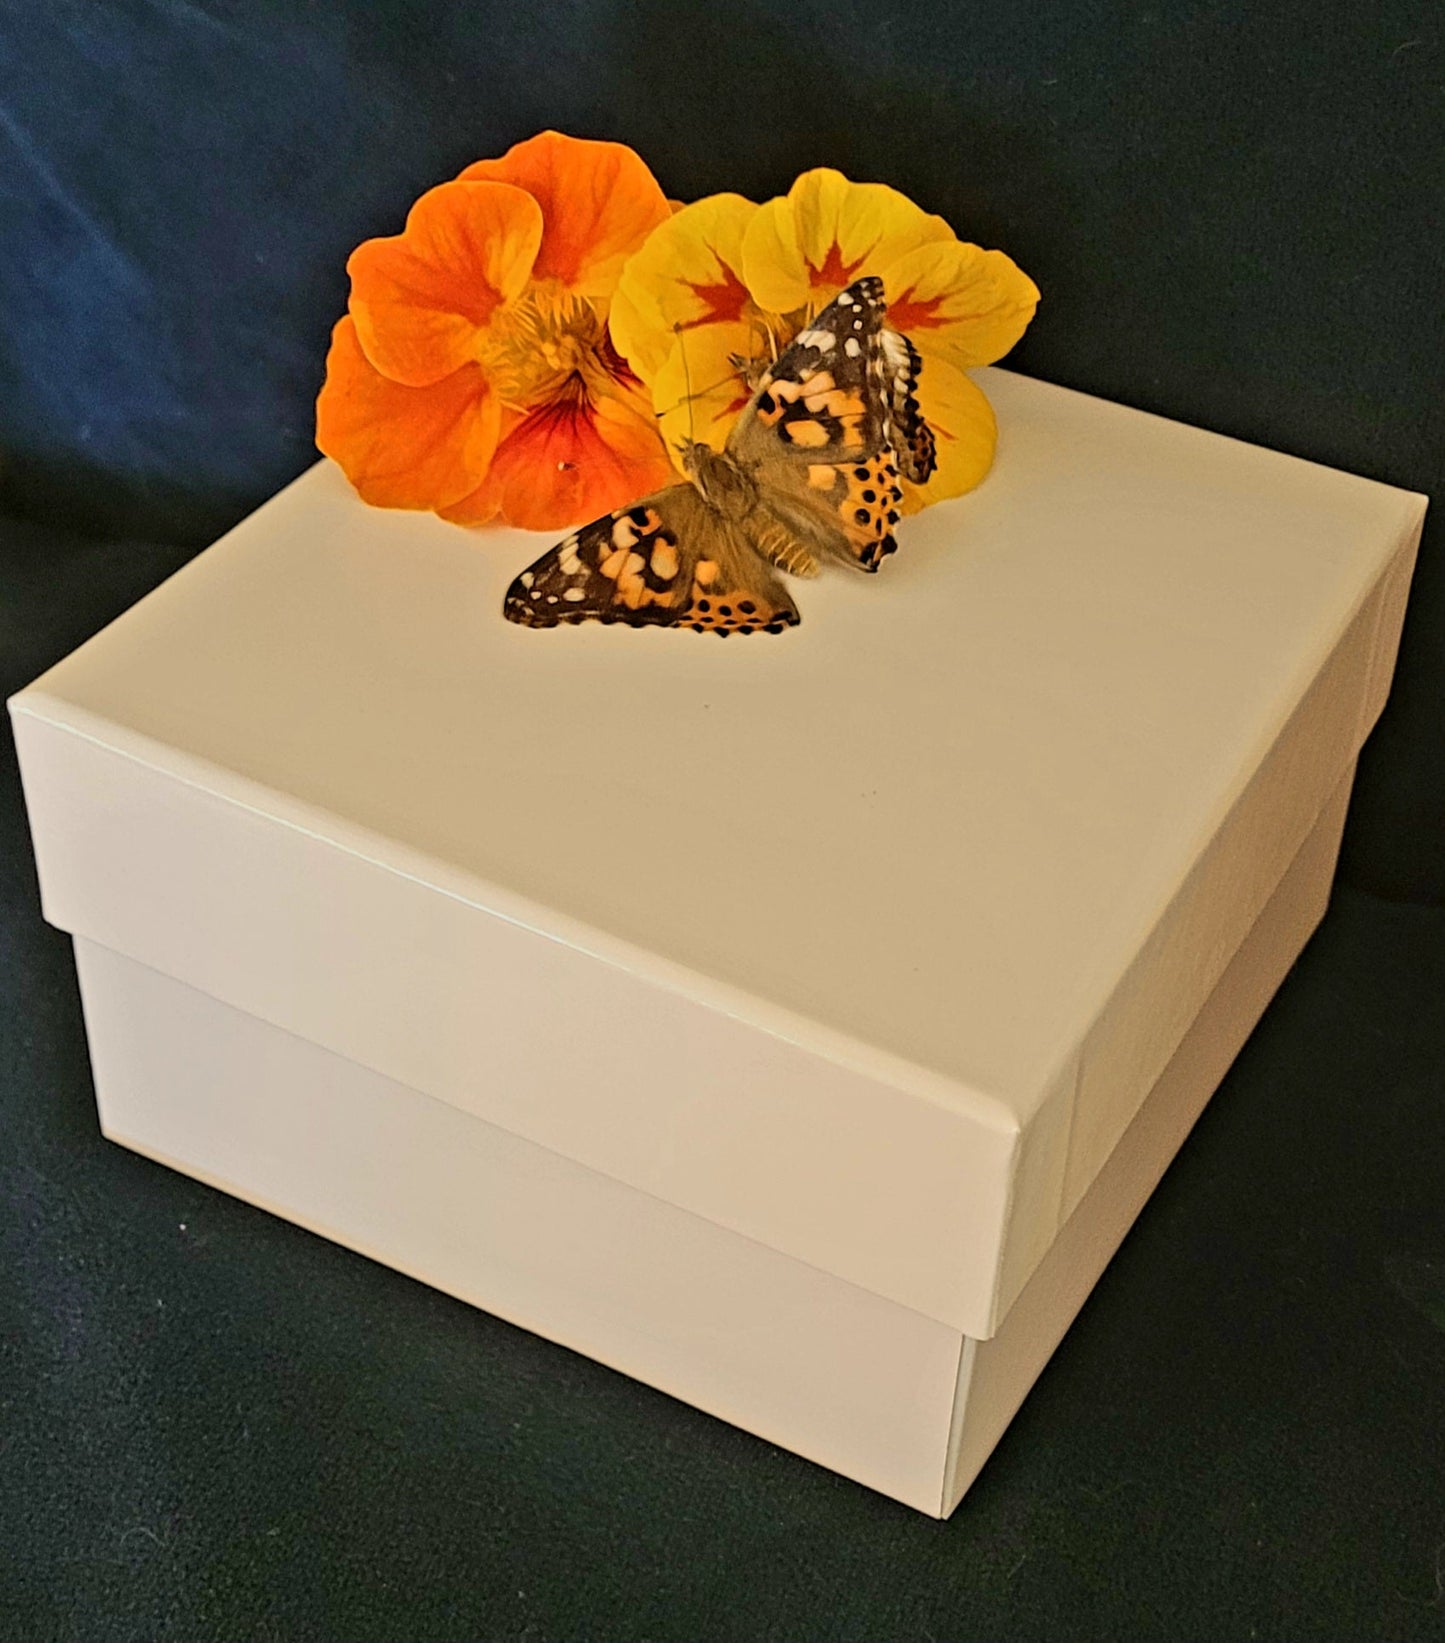 30 Painted Lady Butterflies in a Plain Mass Release Box ~ Please read IMPORTANT INFO BELOW before placing an order.